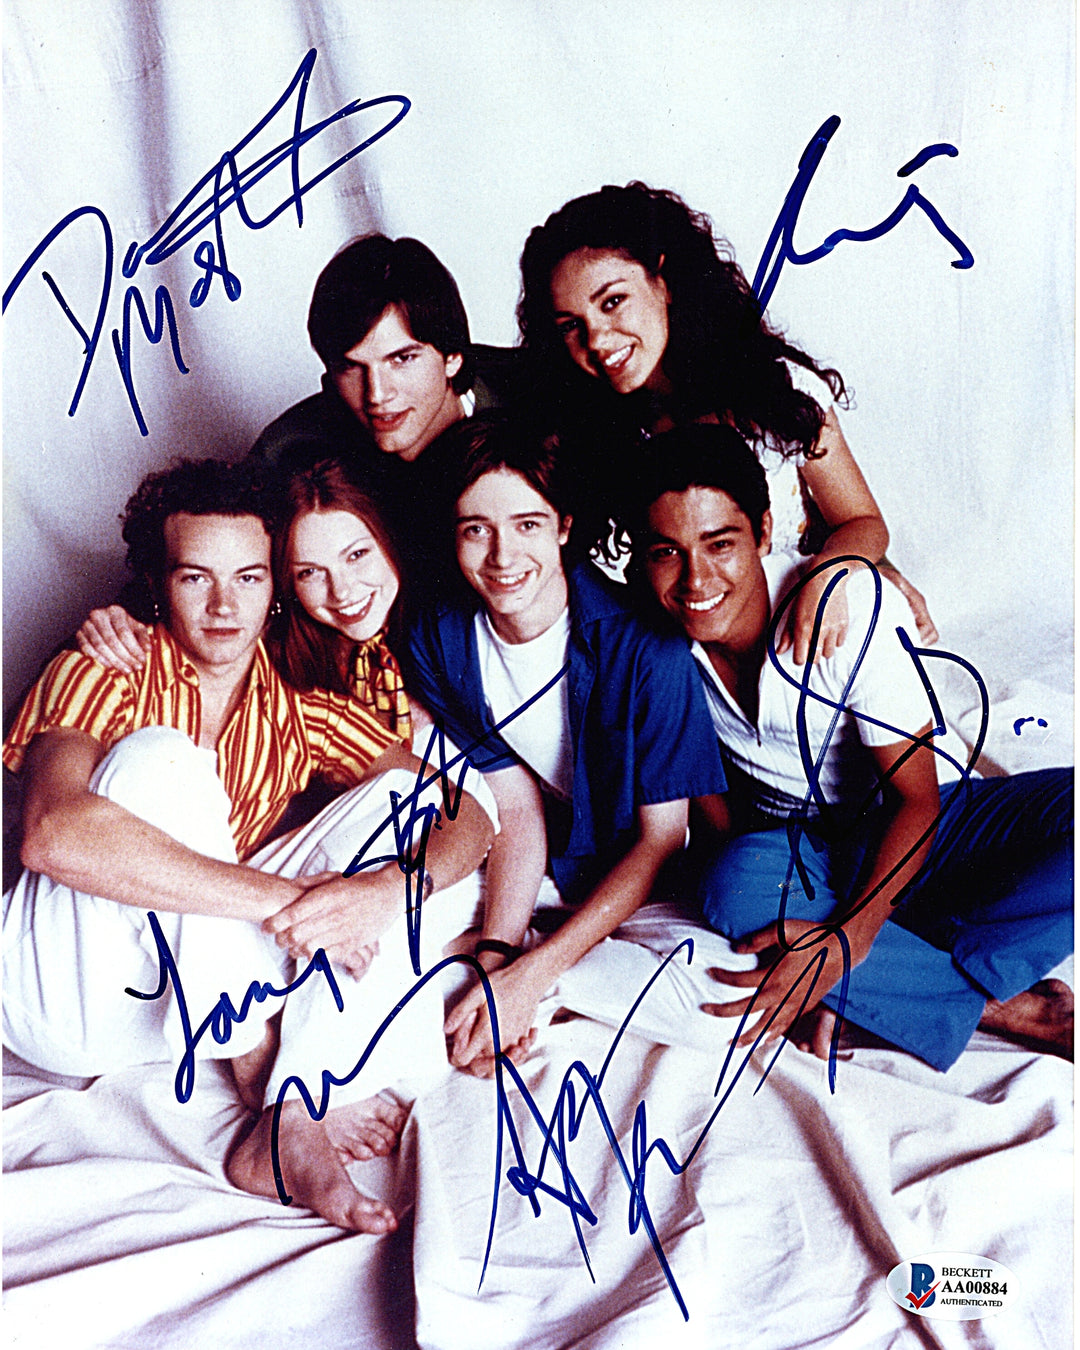 That '70s Show Cast Signed 8x10 Glossy Photo Beckett BAS Certificate LOA AA00884 Autographed by 6